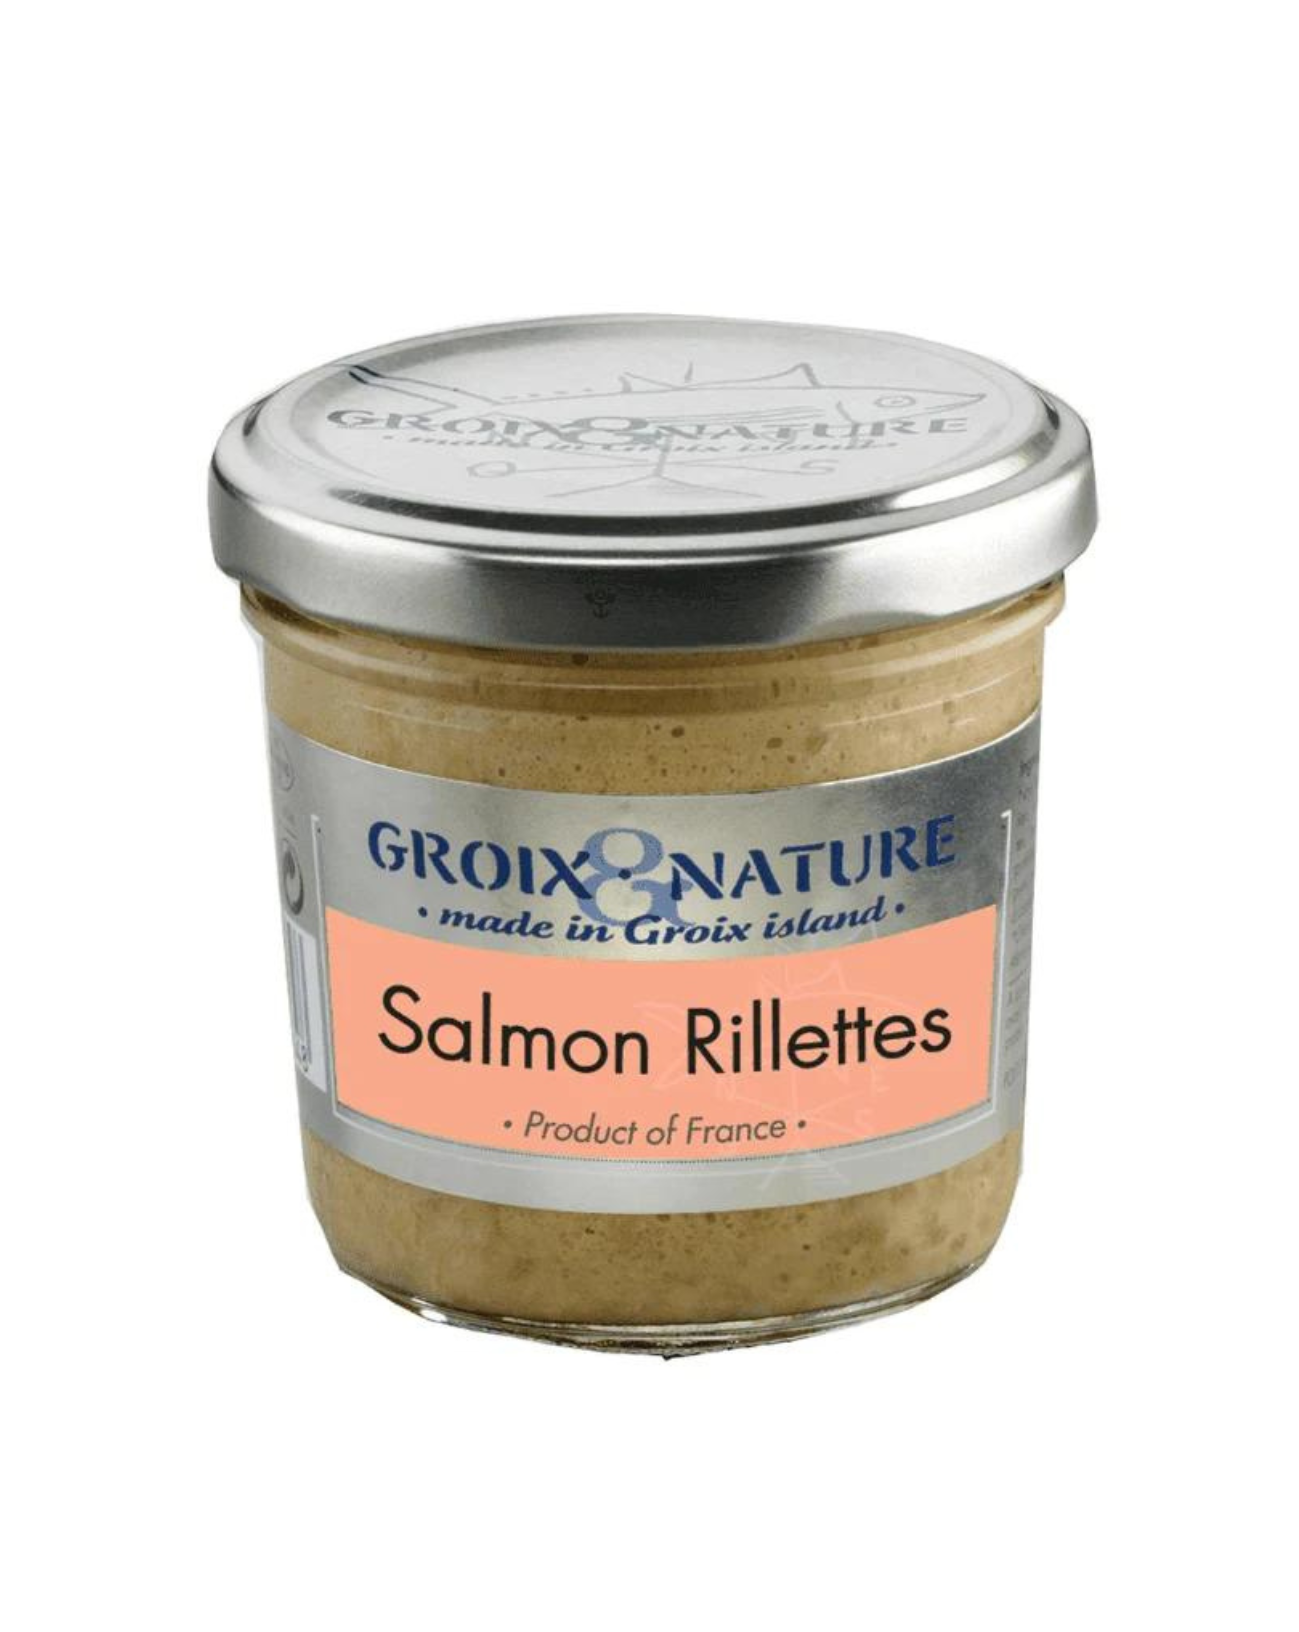 Can of Groix & Nature Salmon Rillettes 100g (3.5 oz)